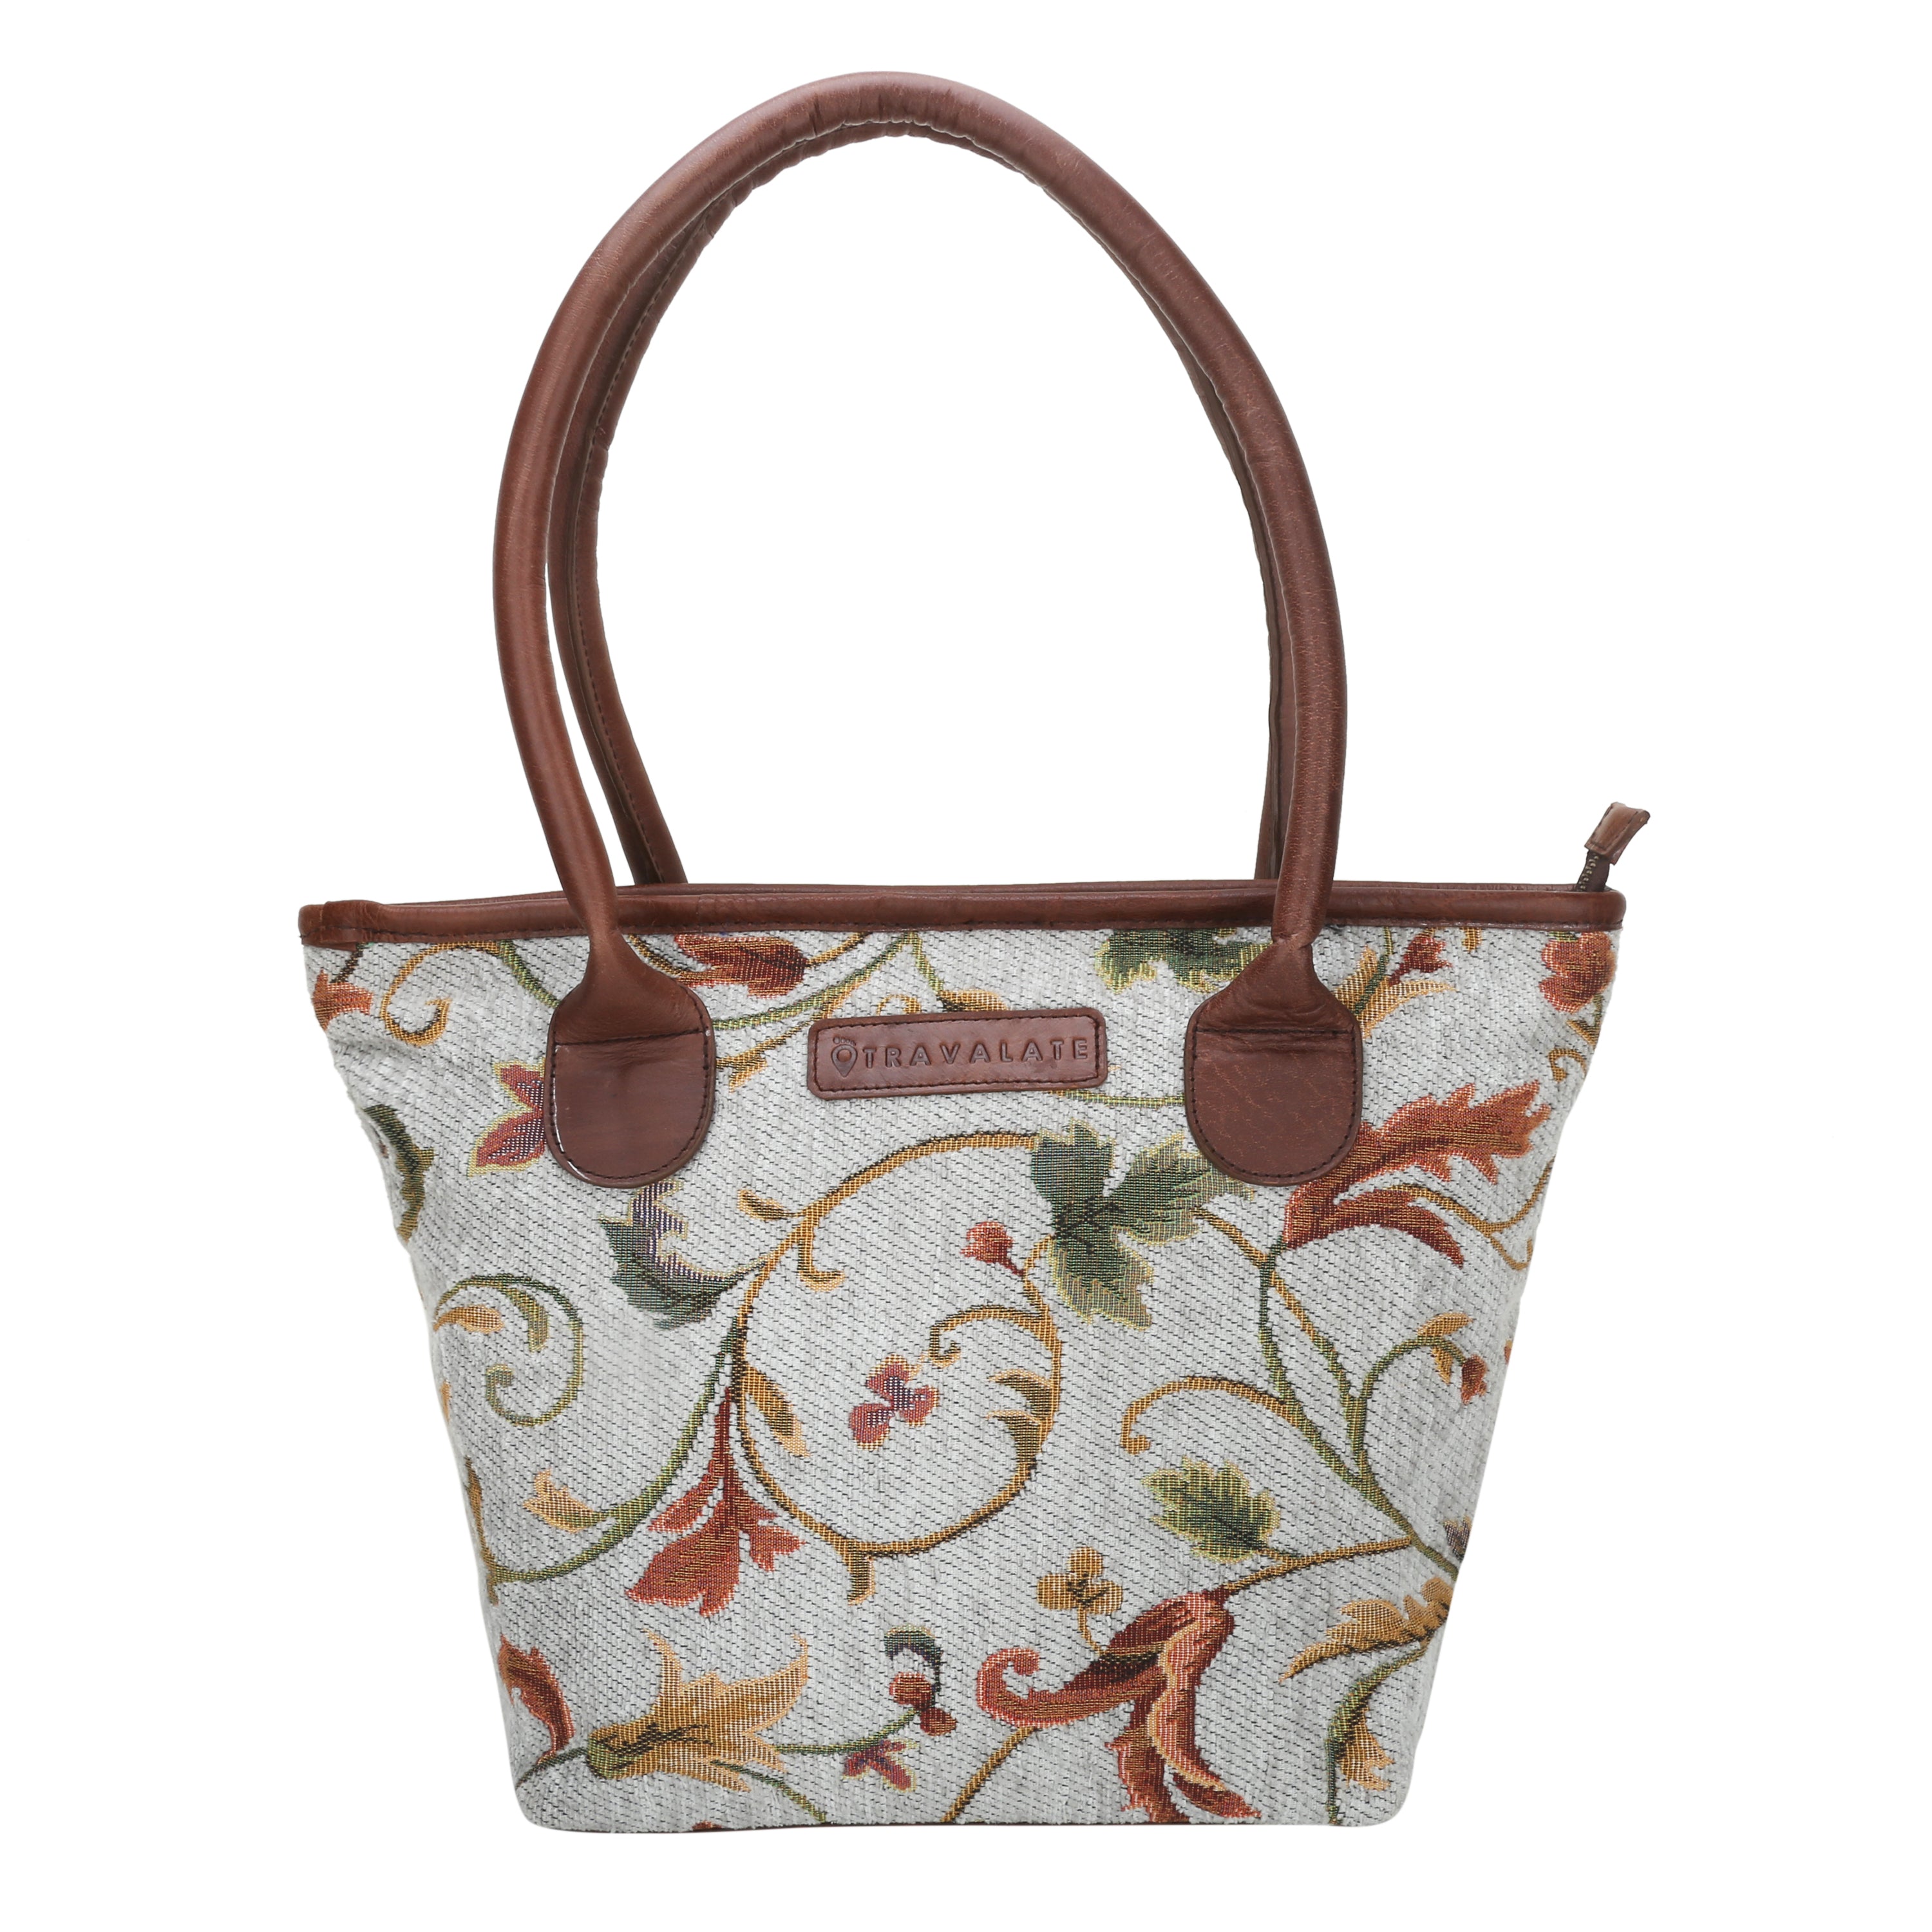 Woven Patterned Tote Bag | Multicolor